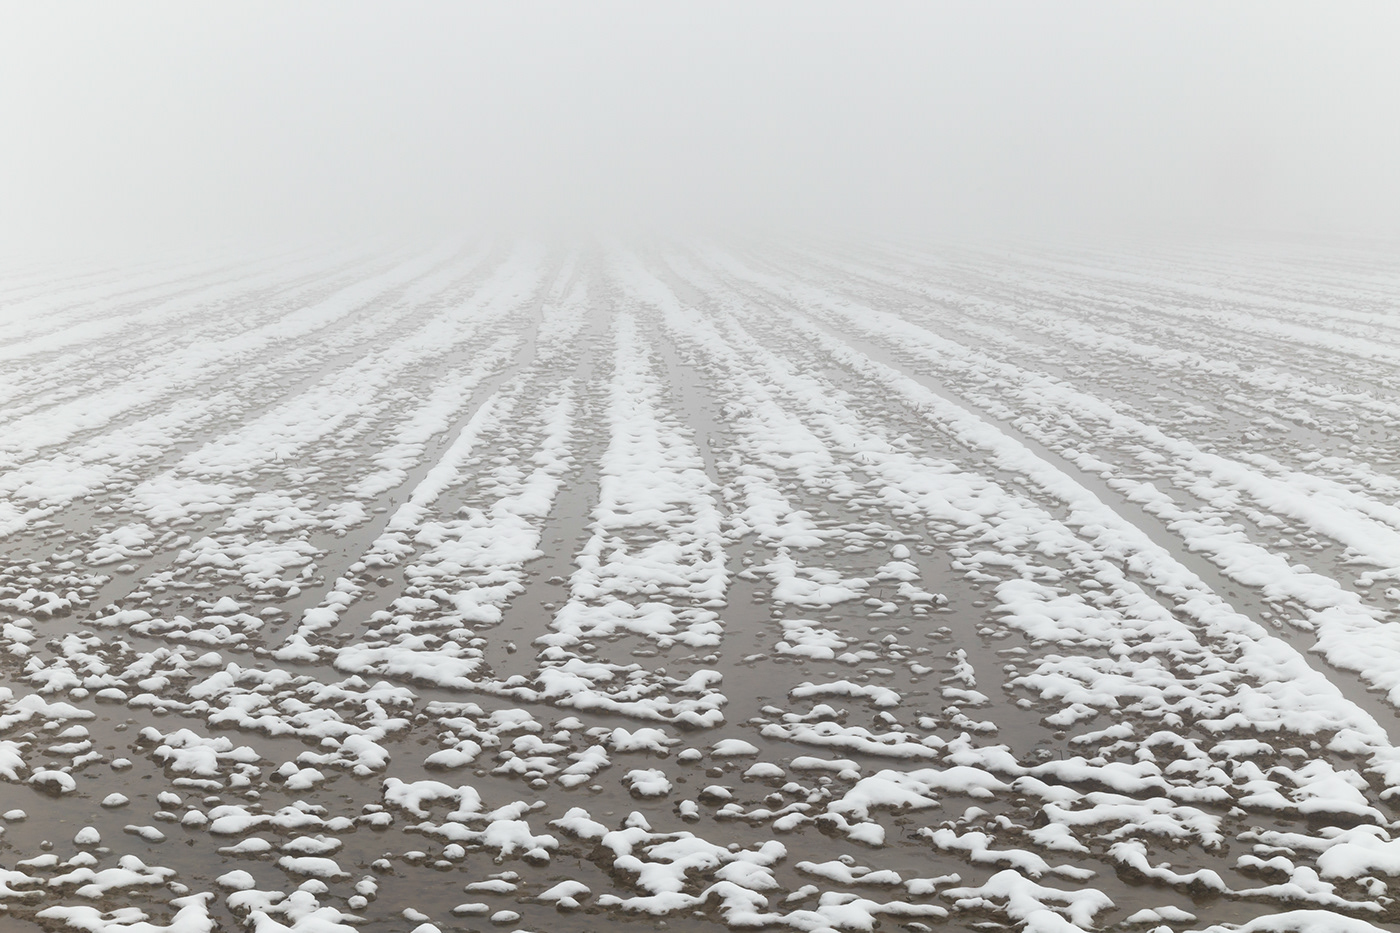 snowy field with diminishing perspective toward nowhere